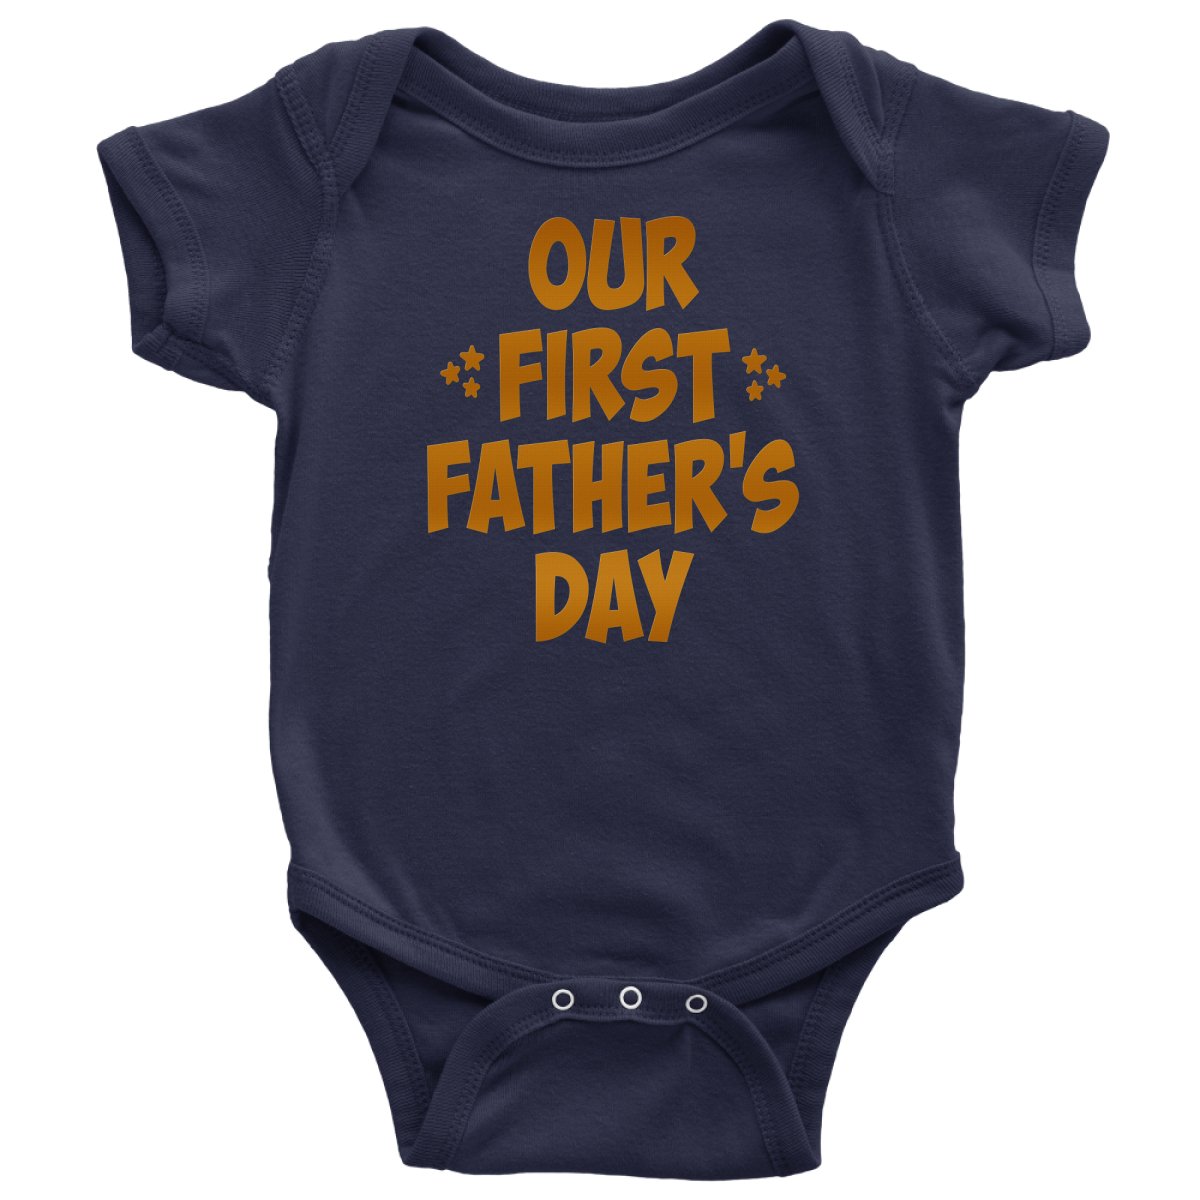 Our First Father's Day Baby Bodysuit & Man's Shirt - Beguiling Phenix Boutique